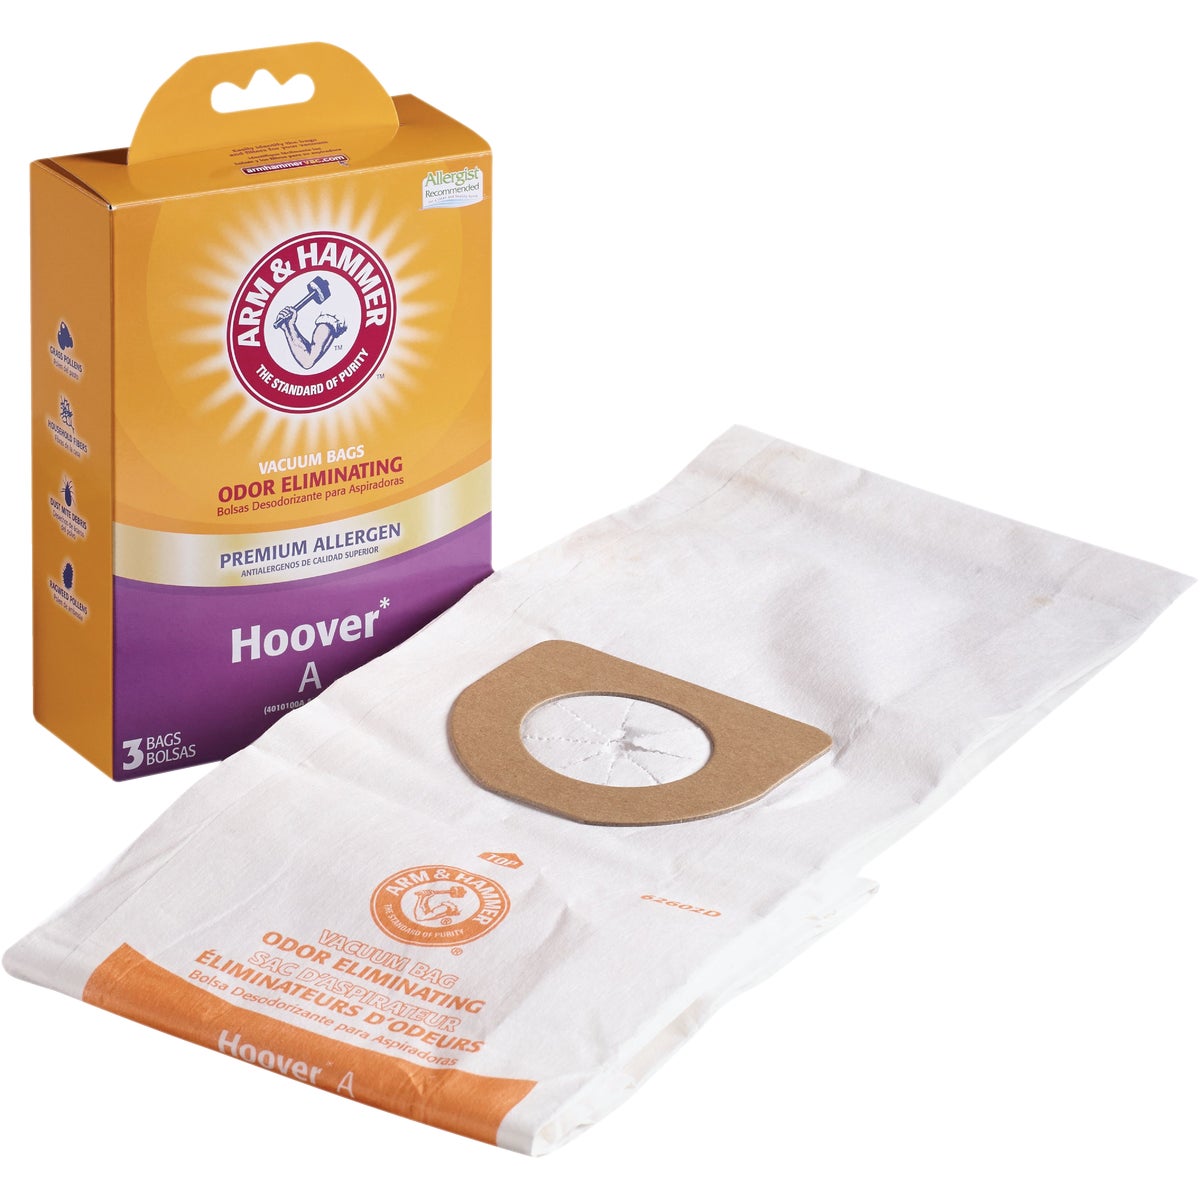 Hoover Arm & Hammer 62602HQ